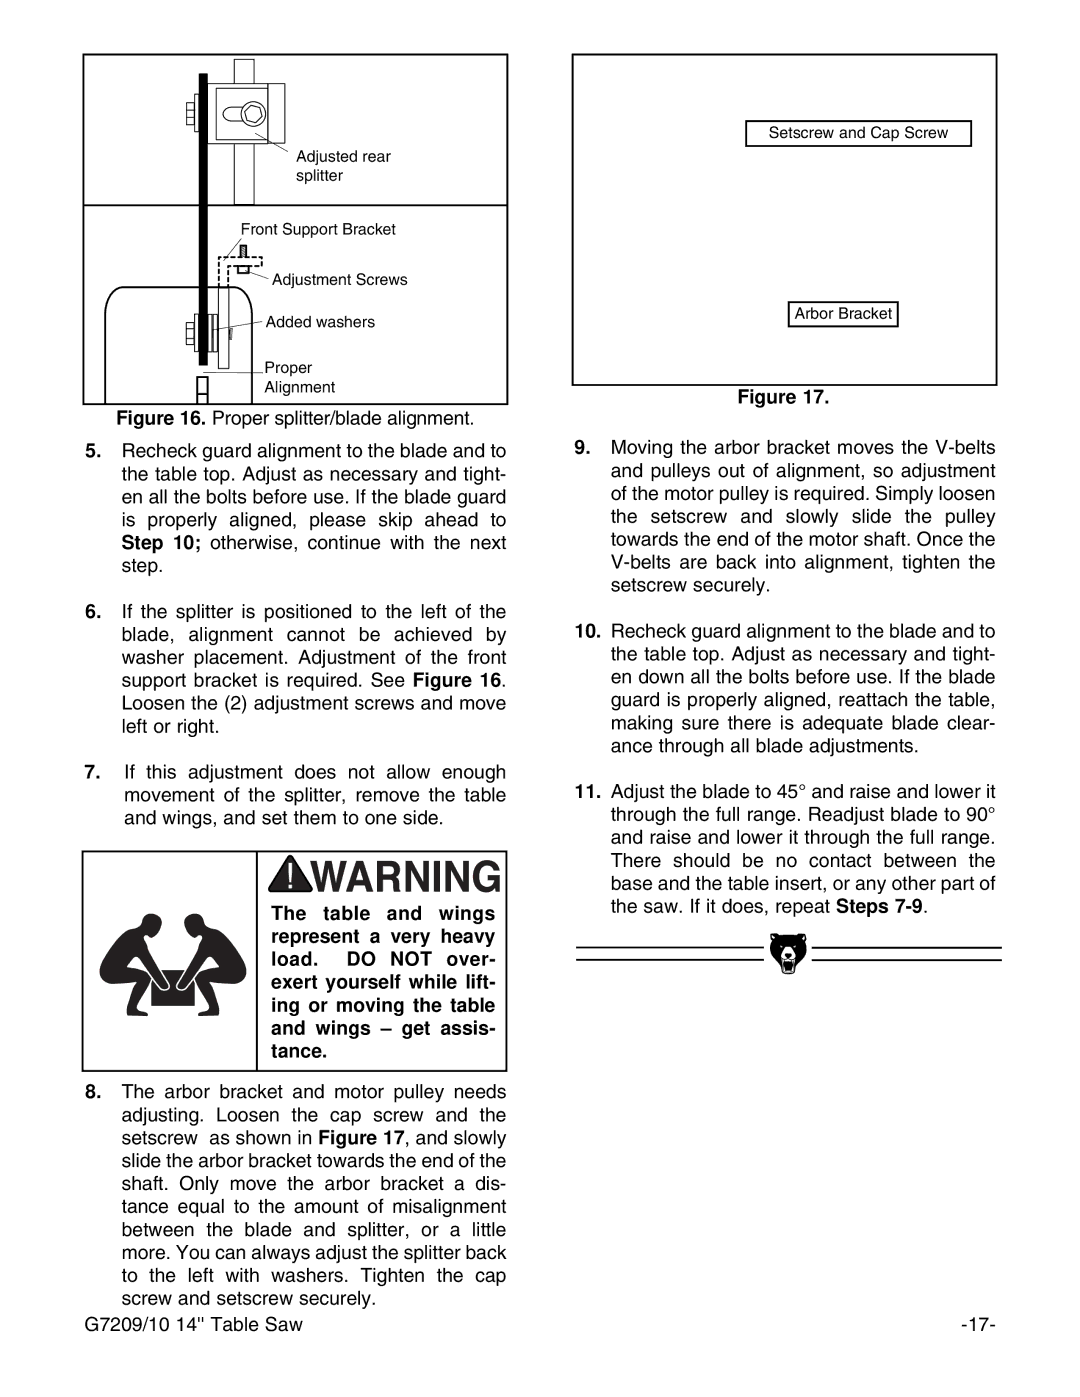 Grizzly G7209 instruction manual Adjusted rear 